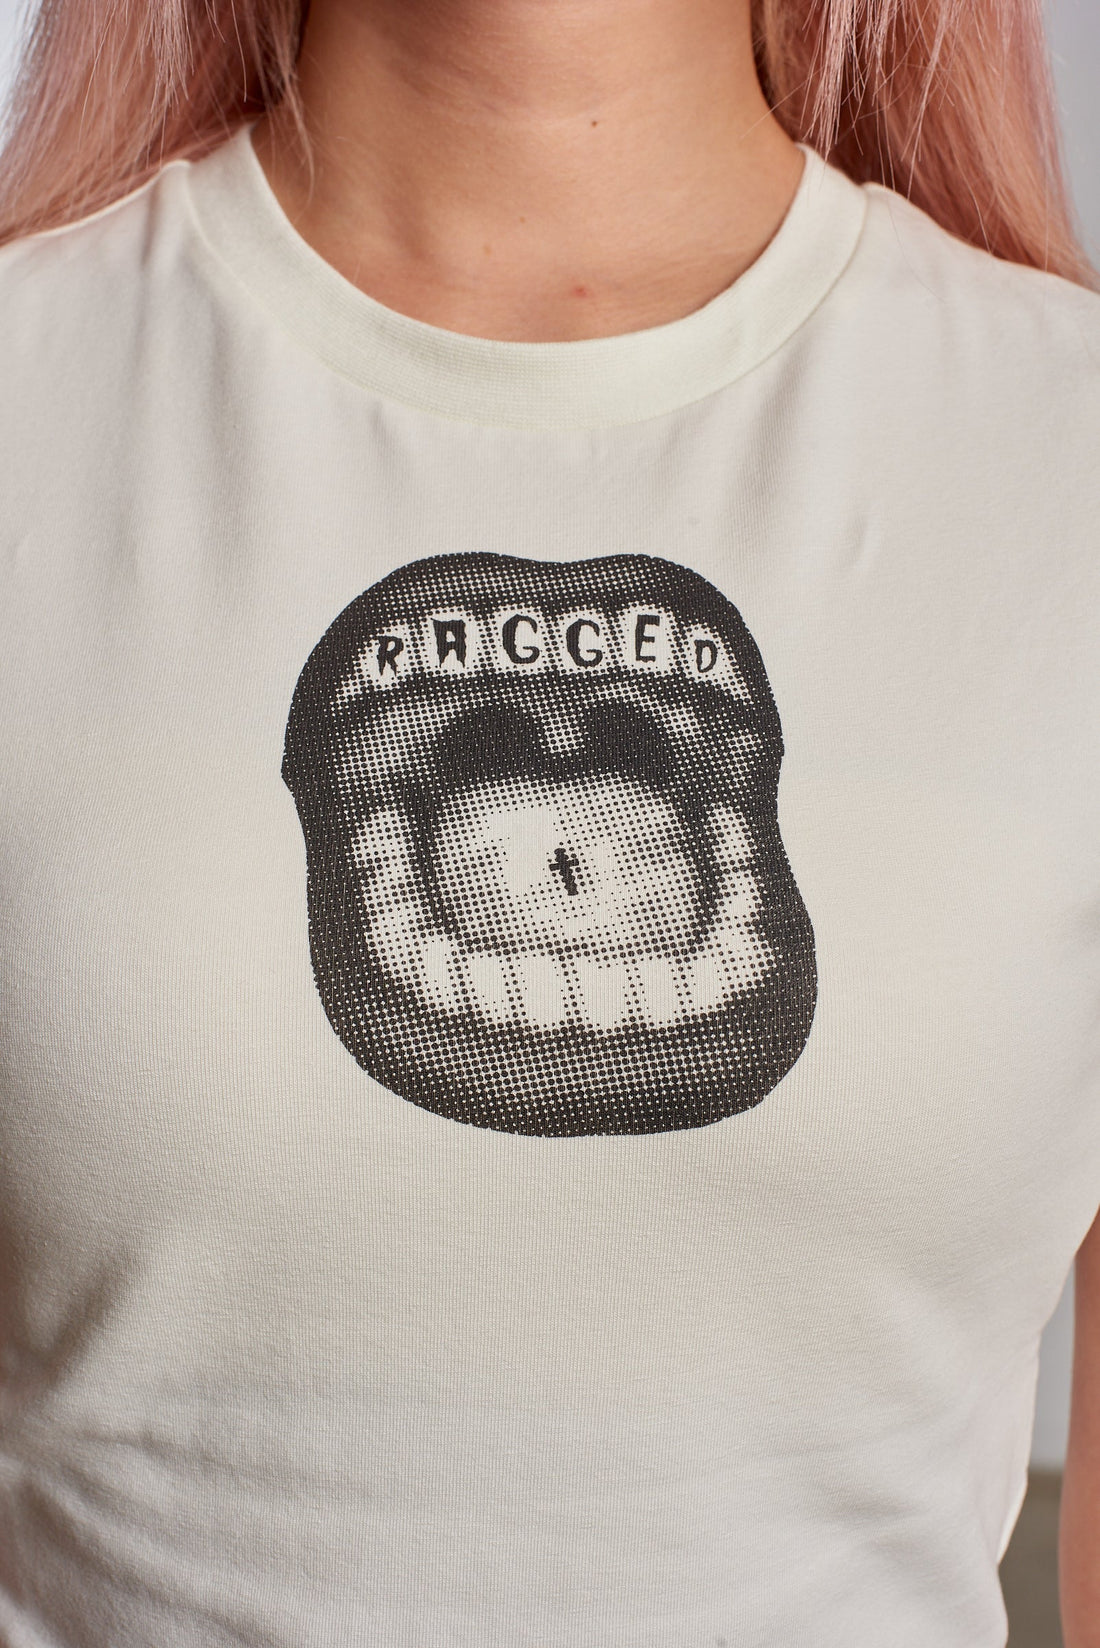 The Ragged Priest Mouthy Baby Tee